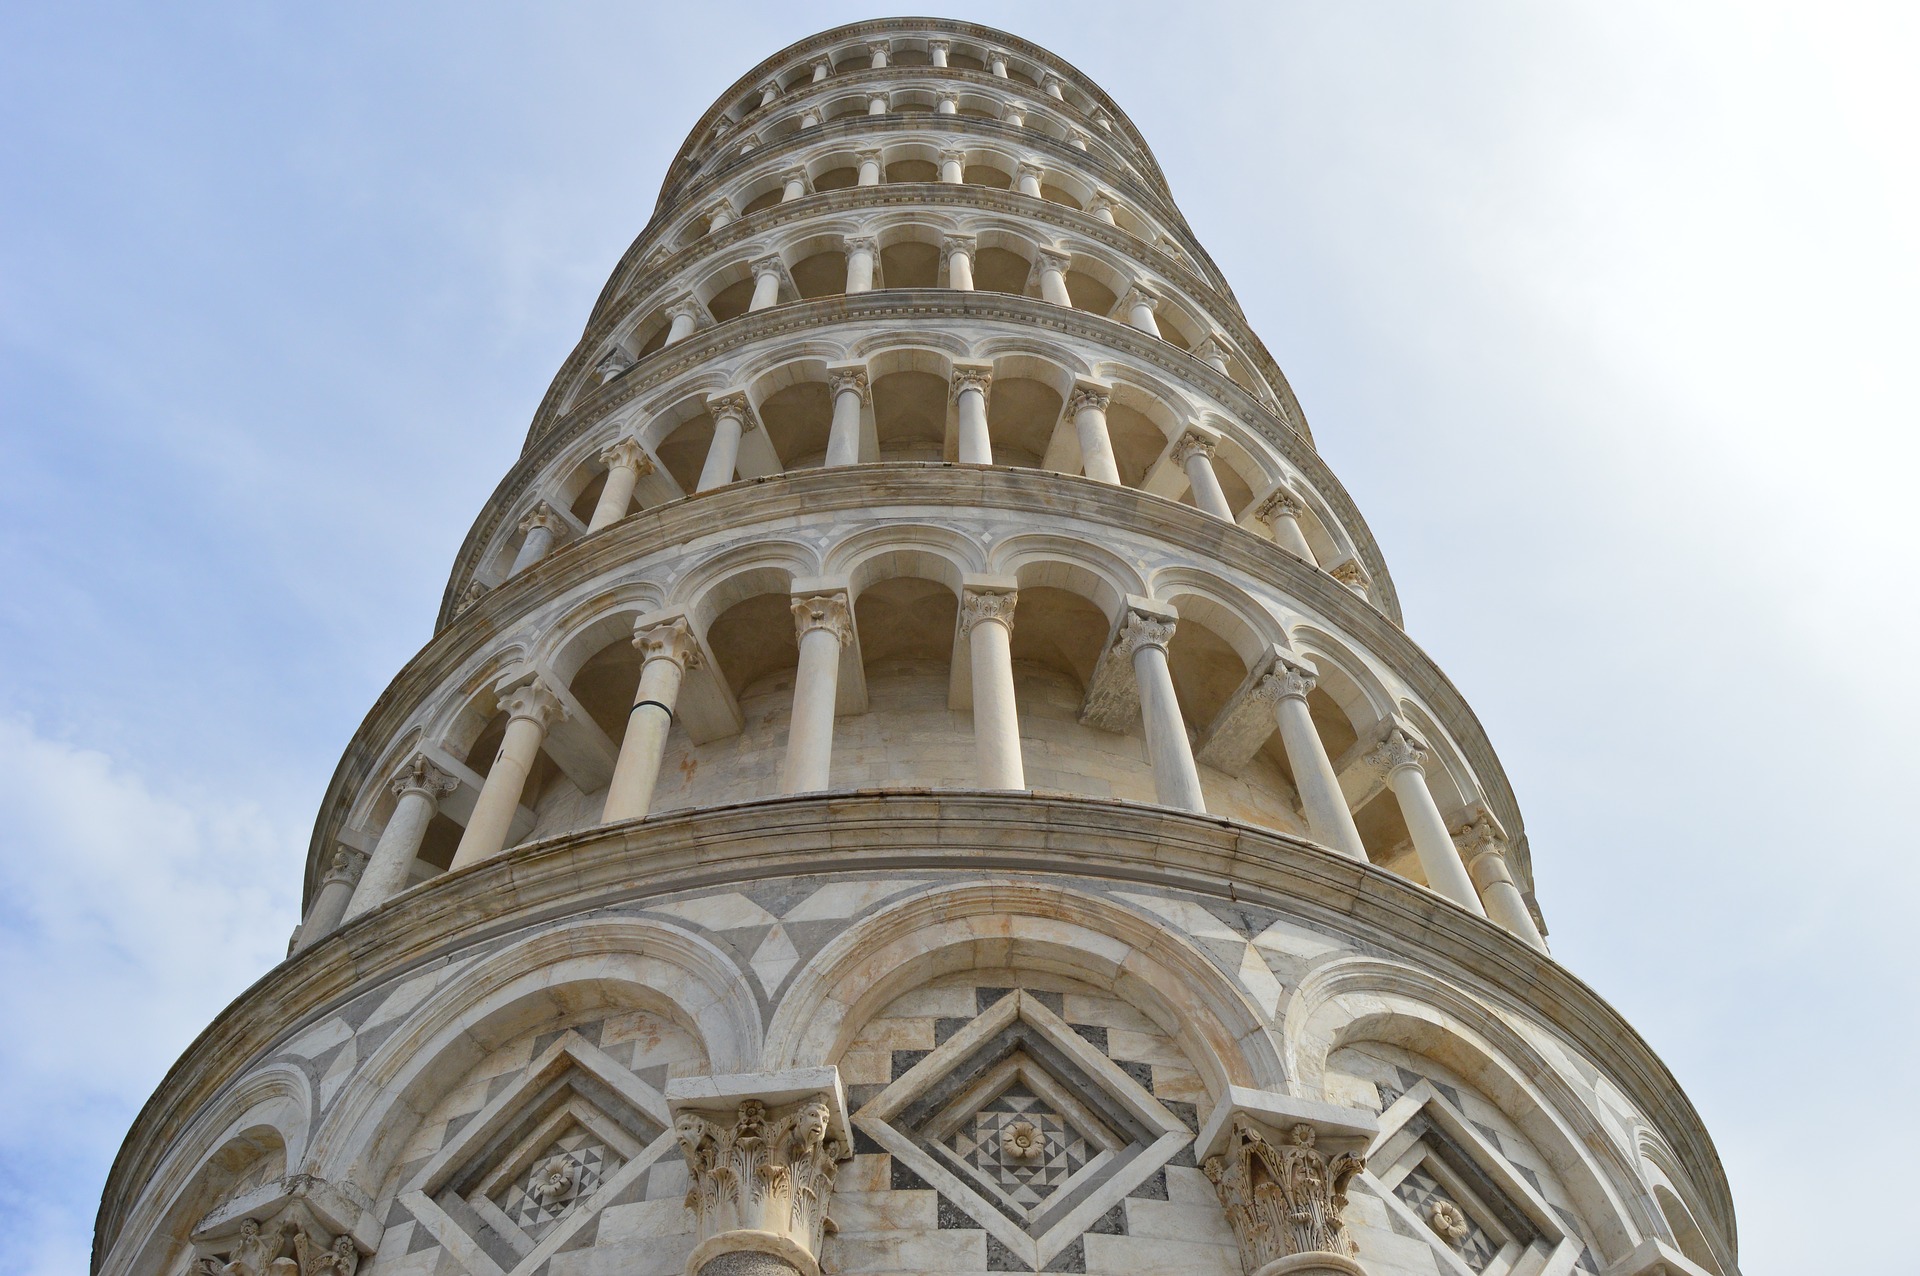 Close up view from the base of the Leaning Tower of Pisa.